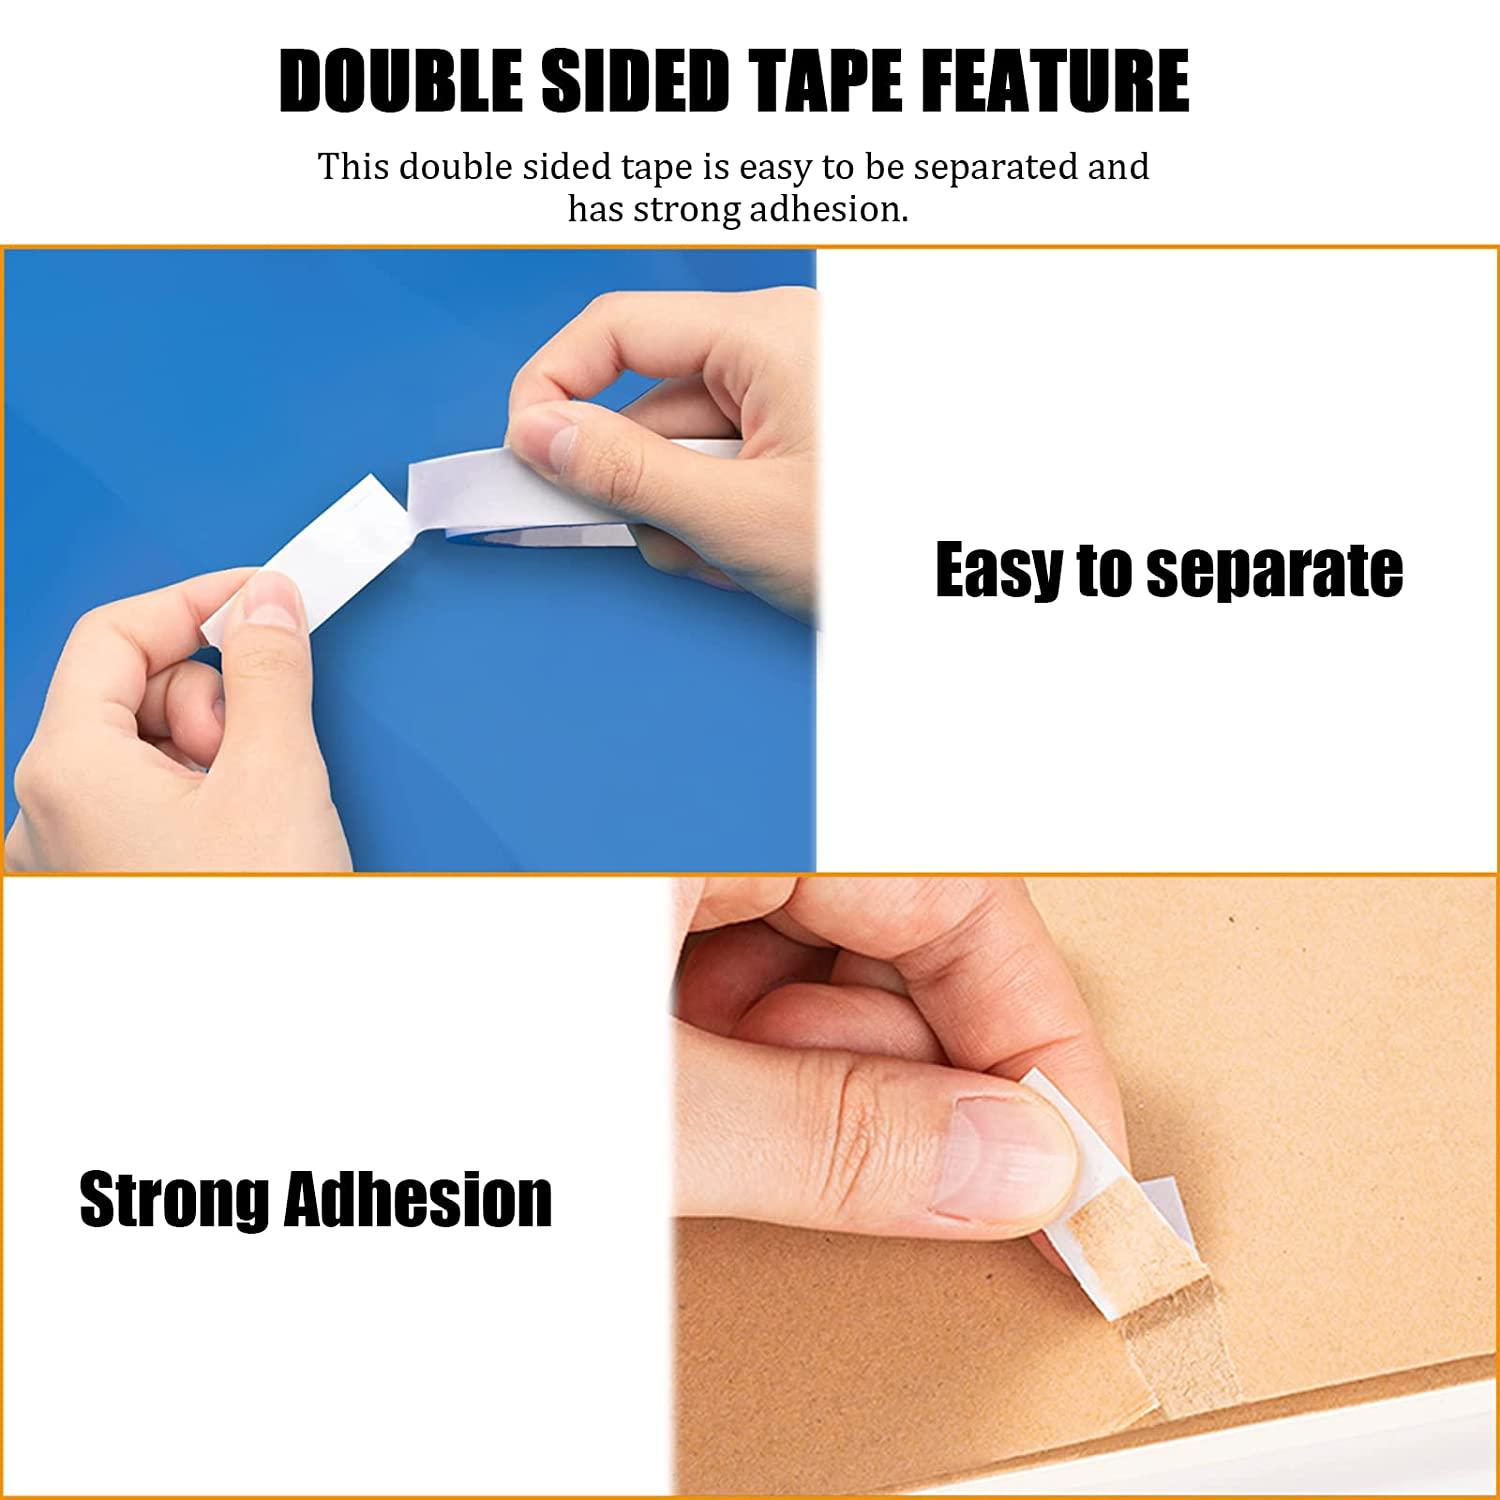 6PCS Premium Double Sided Tape for Crafts, Multi-Size Double Sides Adhesive  Tapes for Arts, Scrapbook Tapes for DIY Photos, Gift Wrapping,  Scrapbooking, Paper Backing, Office School Supplies (65FT)